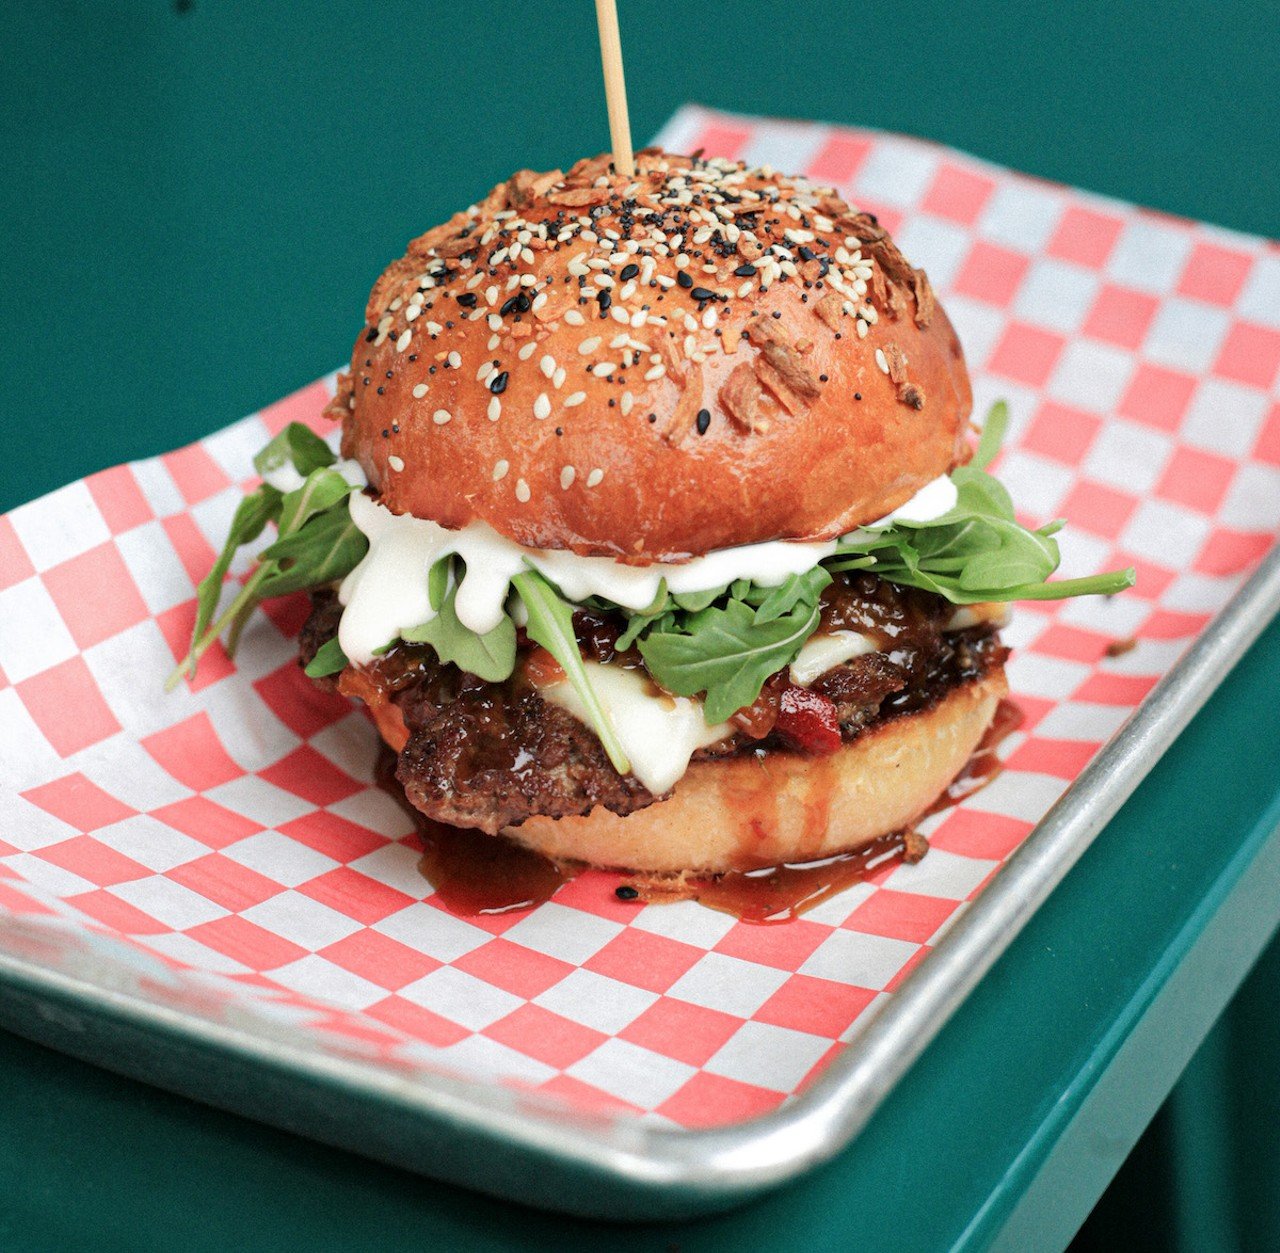 Proud Hound
6717 Montgomery Road, Silverton
Brekkie Burger: Fischer Farms smashed beef patty topped with white American cheese, bacon-onion-pepper jam, whipped quark cheese and arugula on an everything-seasoned milk bun.